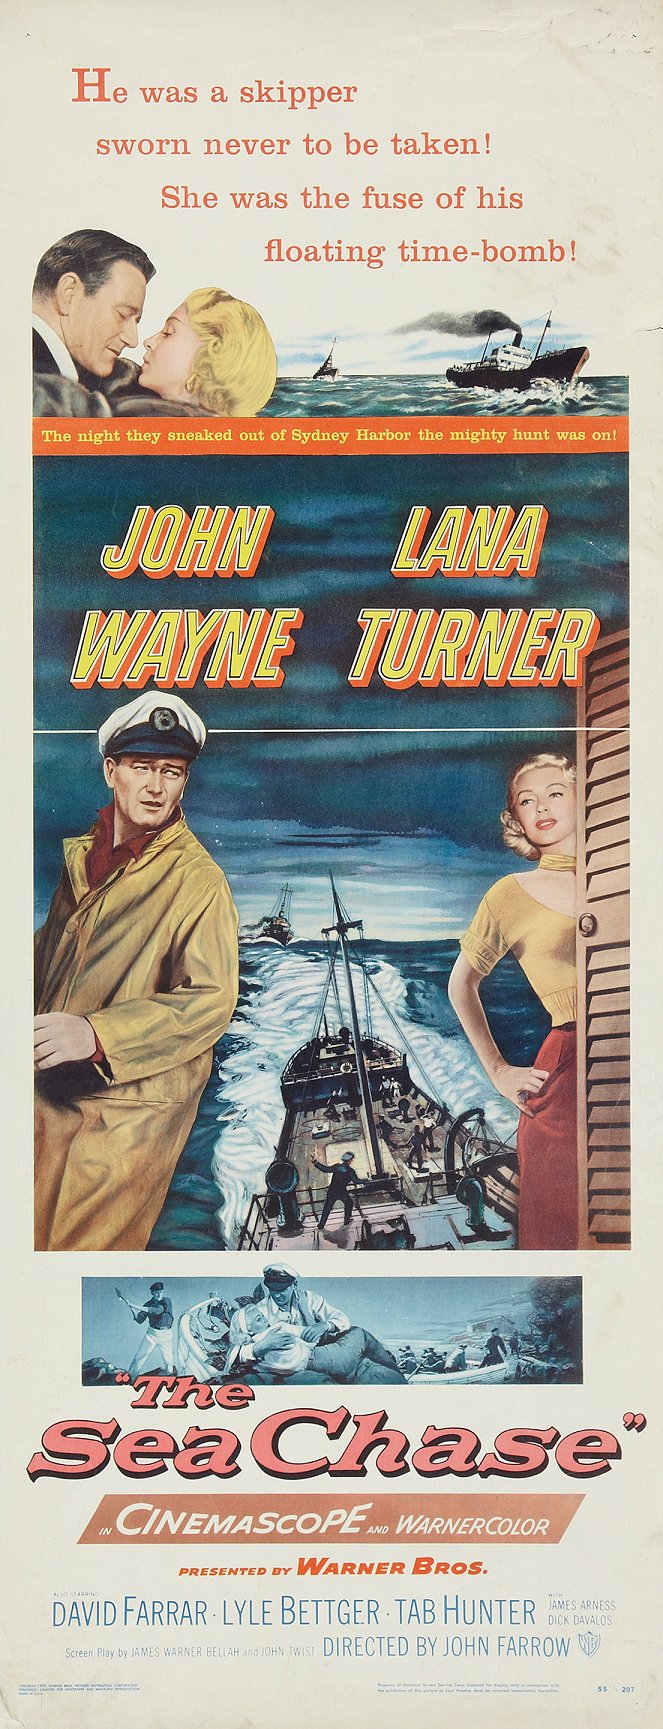 The Sea Chase - Posters